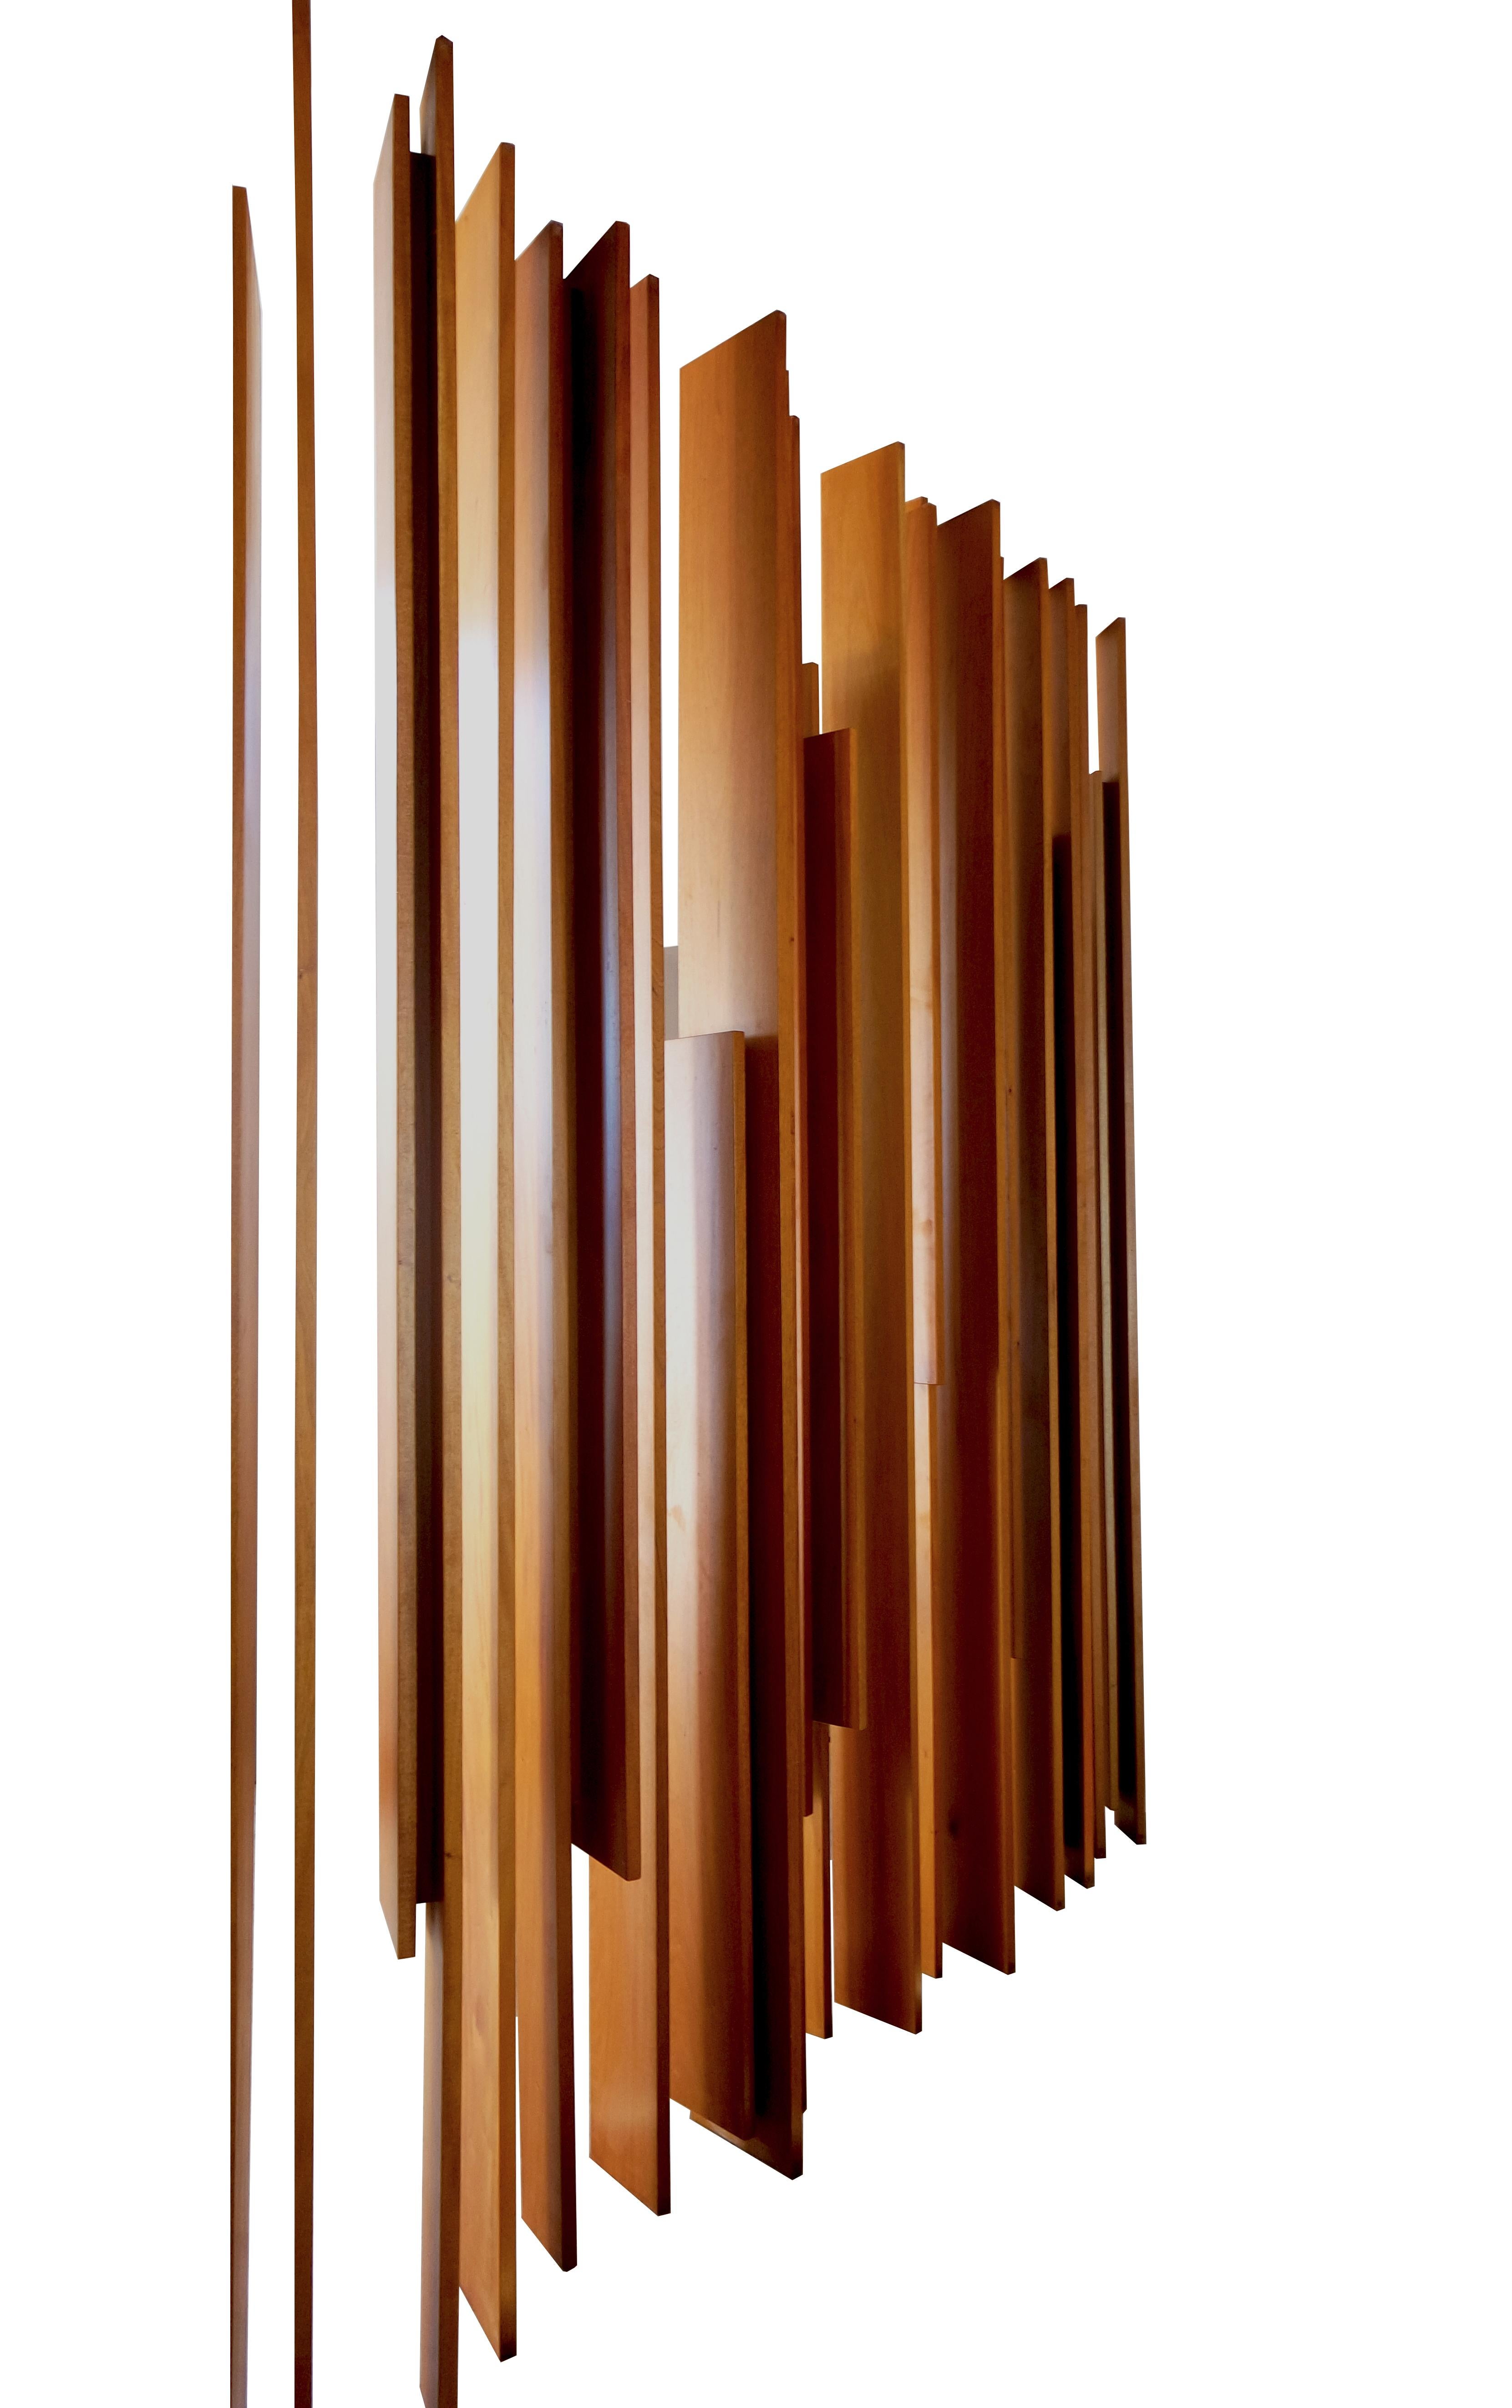 Modern Wood Sculpture Wall Screen / Room Divider by Pierre Sarkis